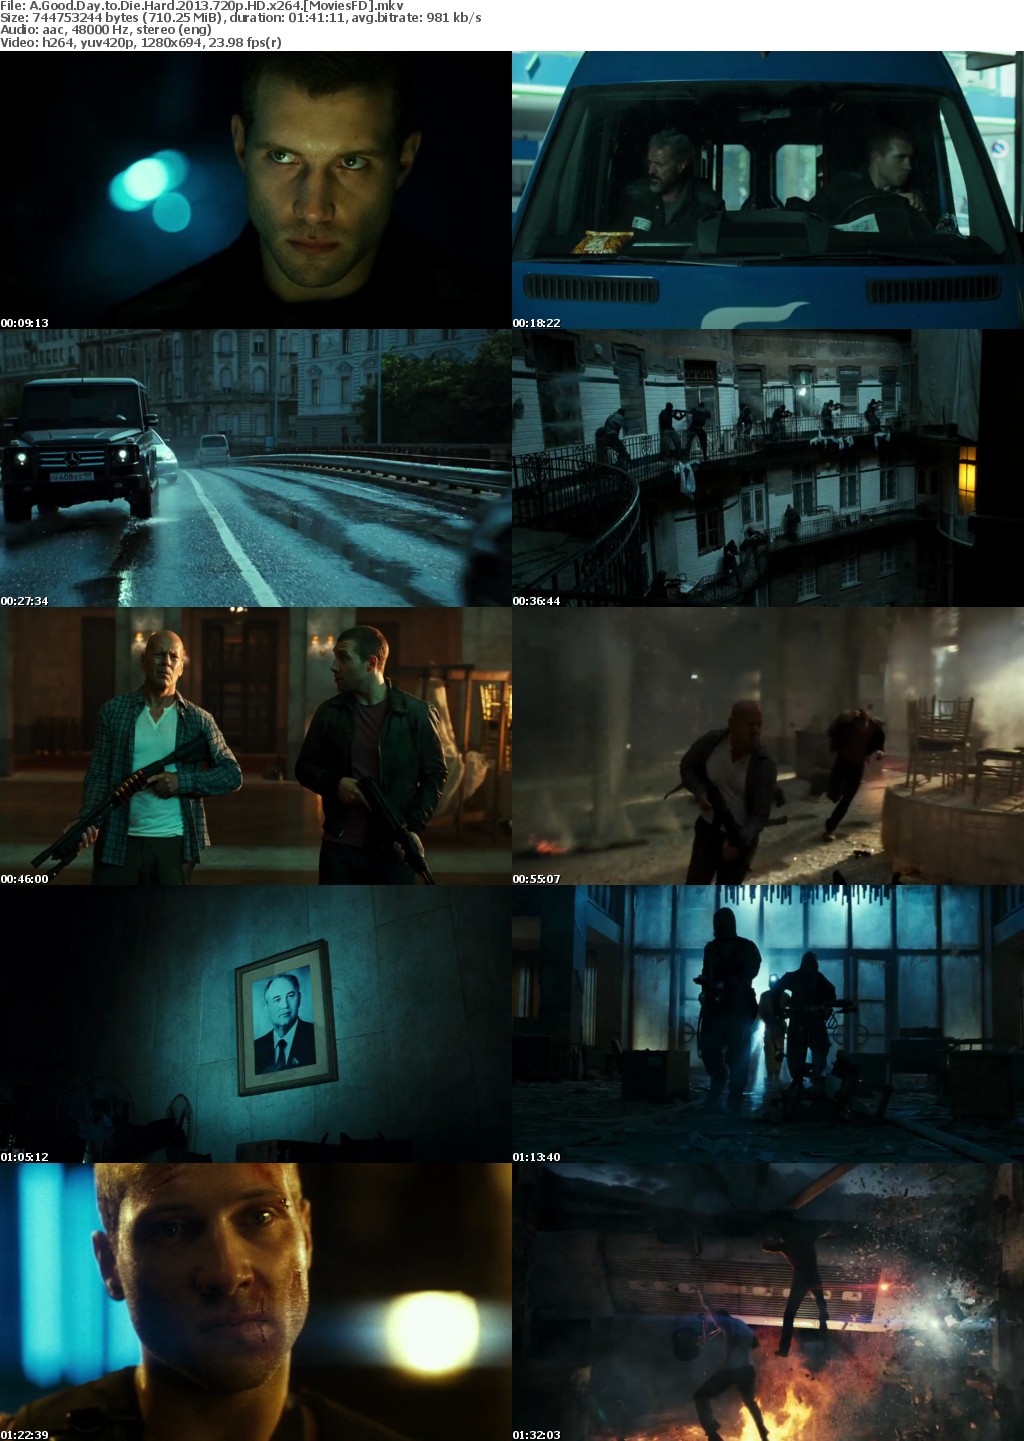 A Good Day to Die Hard 2013 720p HD x264 MoviesFD